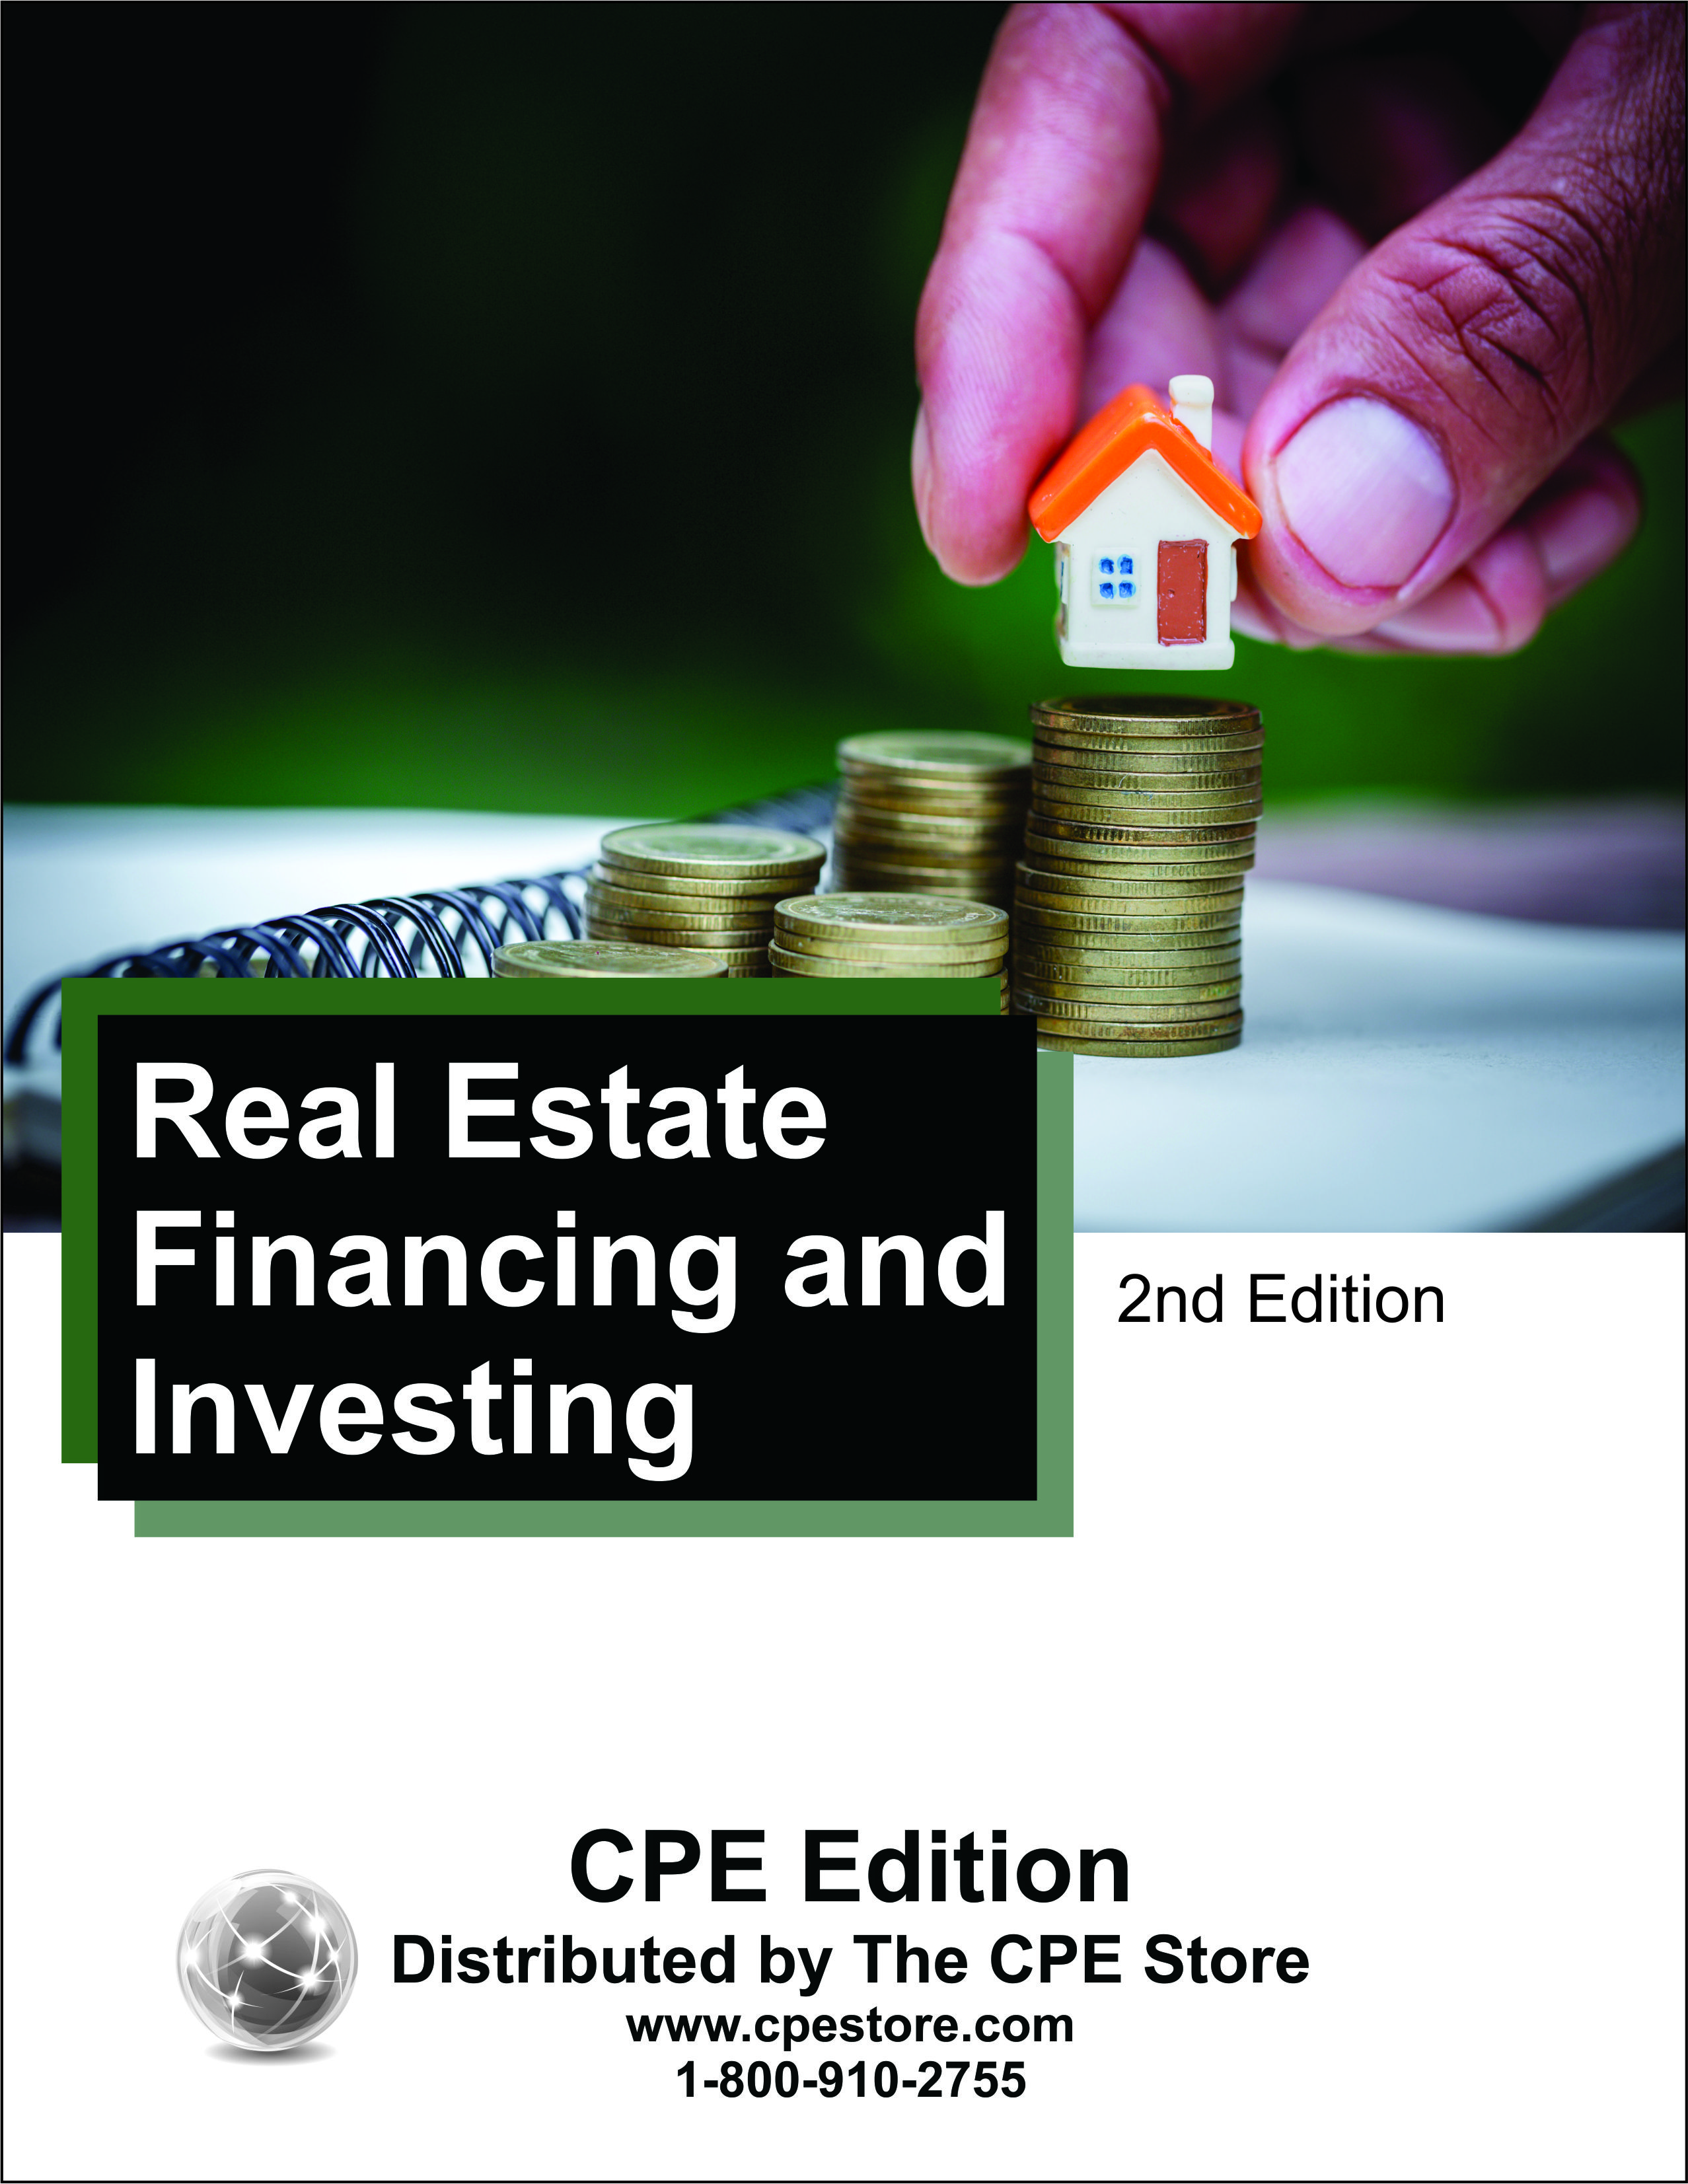 Real Estate Financing and Investing